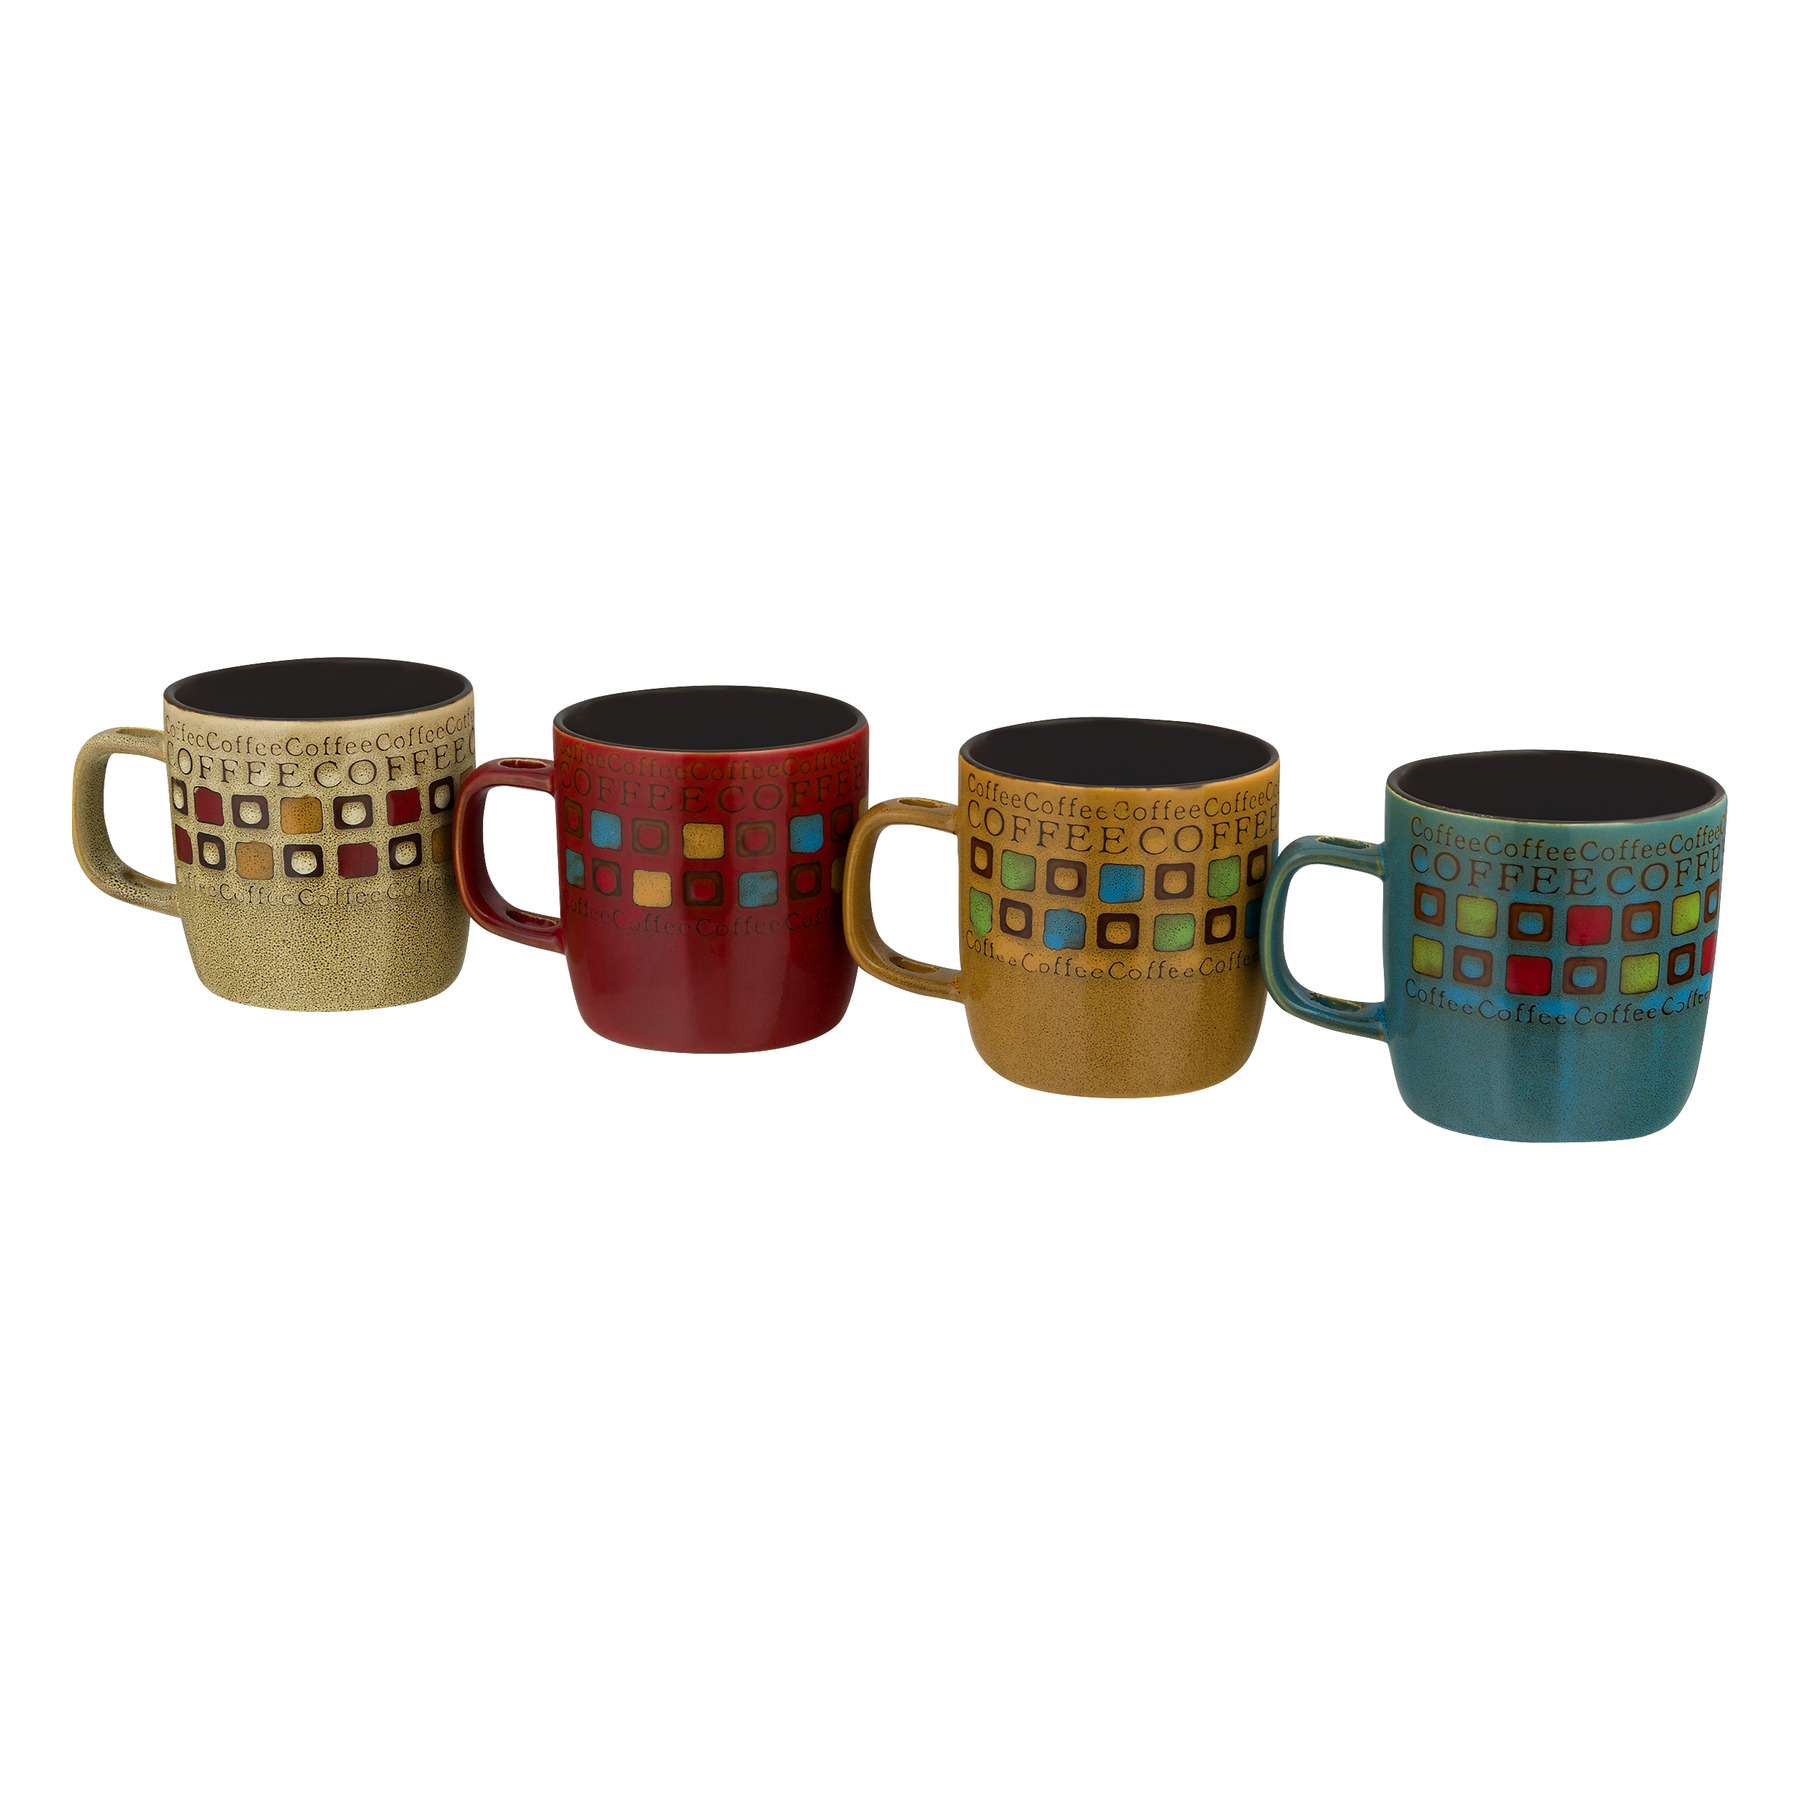 Mr. Coffee Cafe Americano Mugs With Spoons - 8 PC, 8.0 PIECE(S) - image 3 of 5